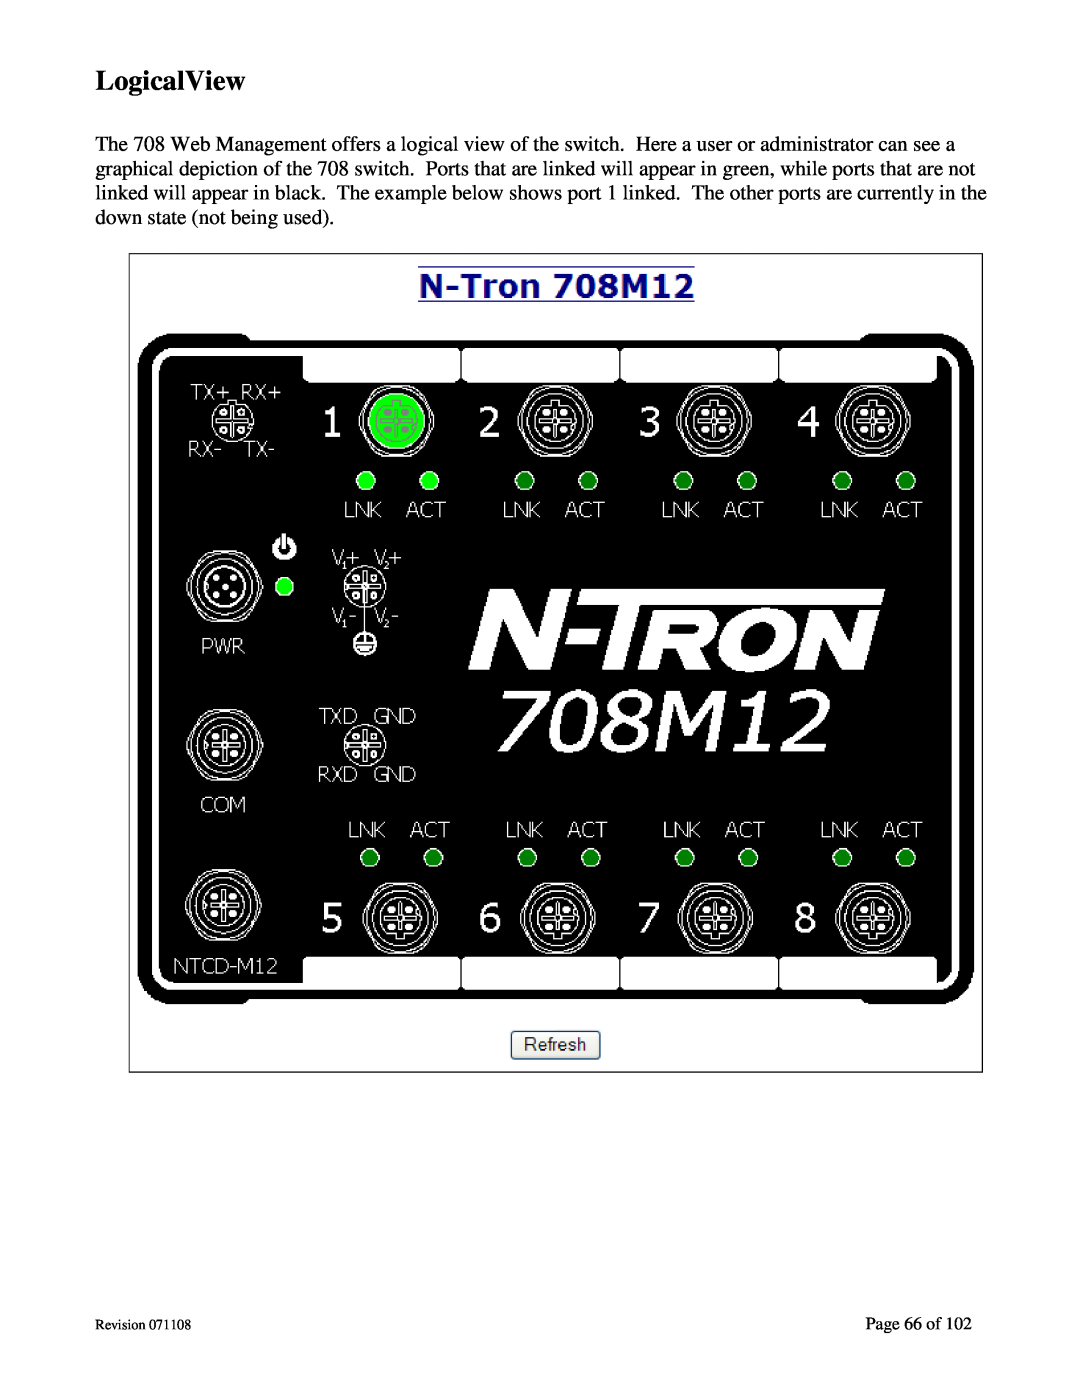 N-Tron 708M12 user manual LogicalView, Page 66 of, Revision 